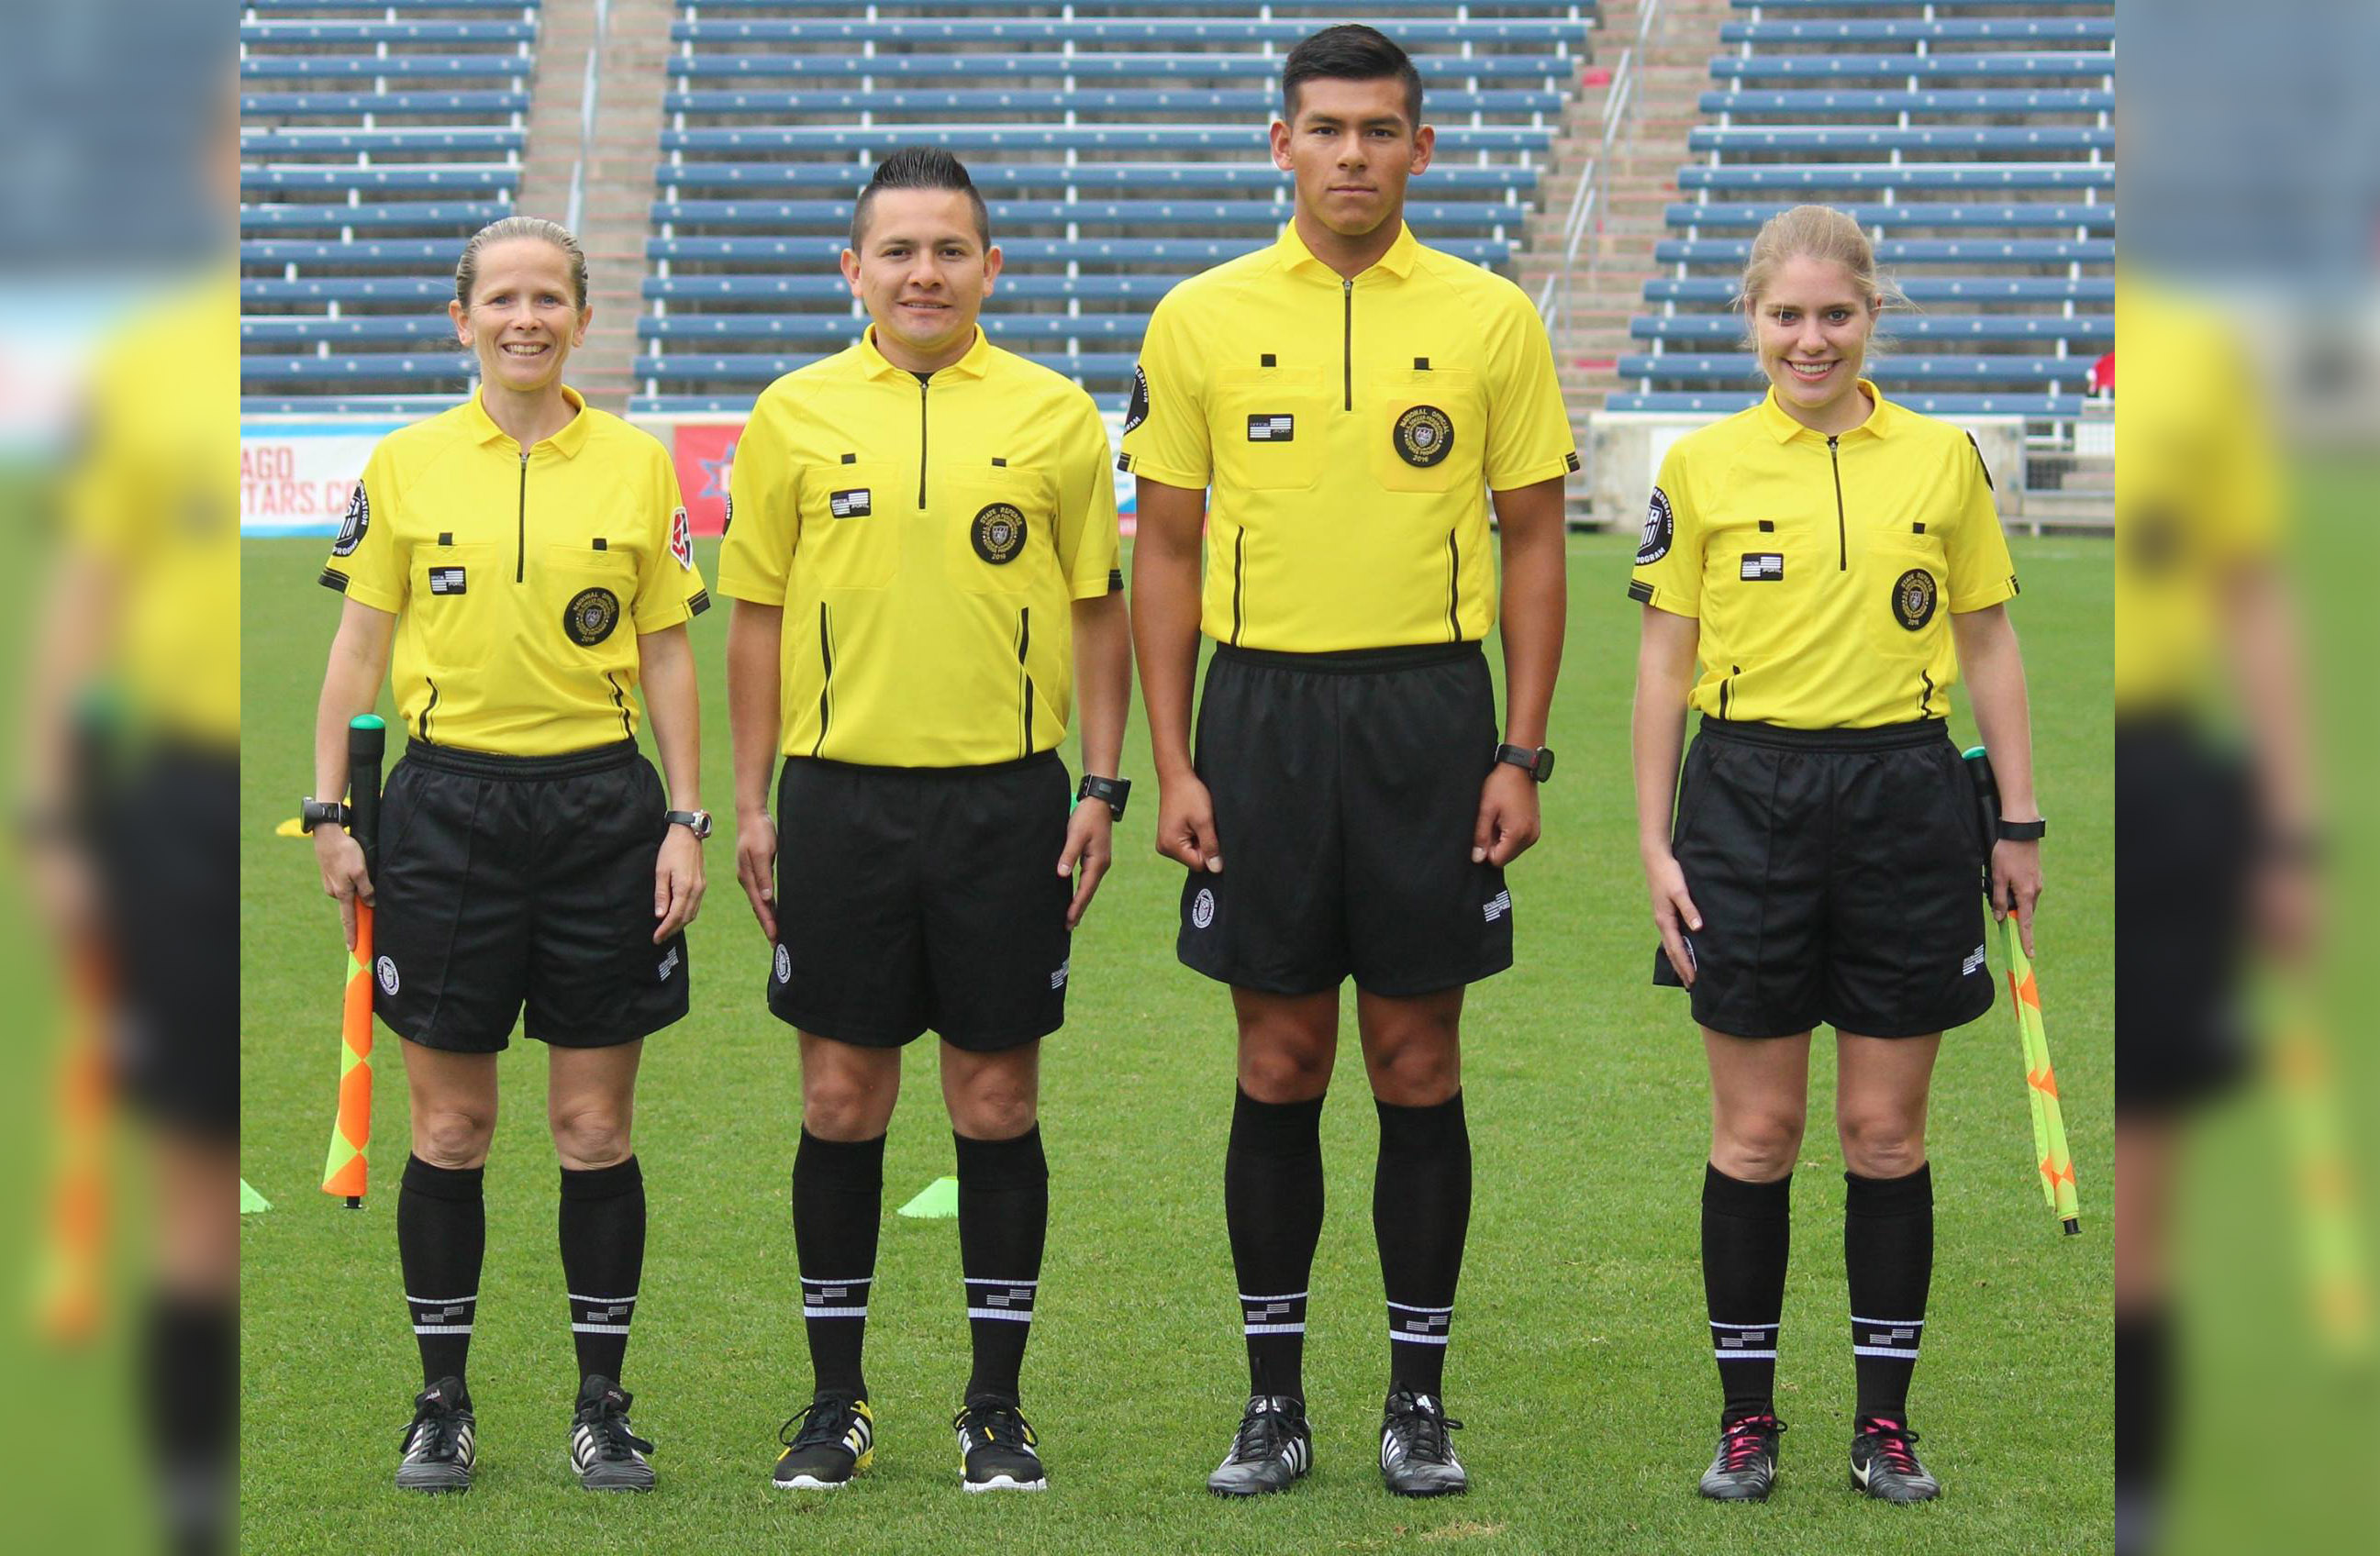 New Referee Uniforms from Official Sports - CNRA